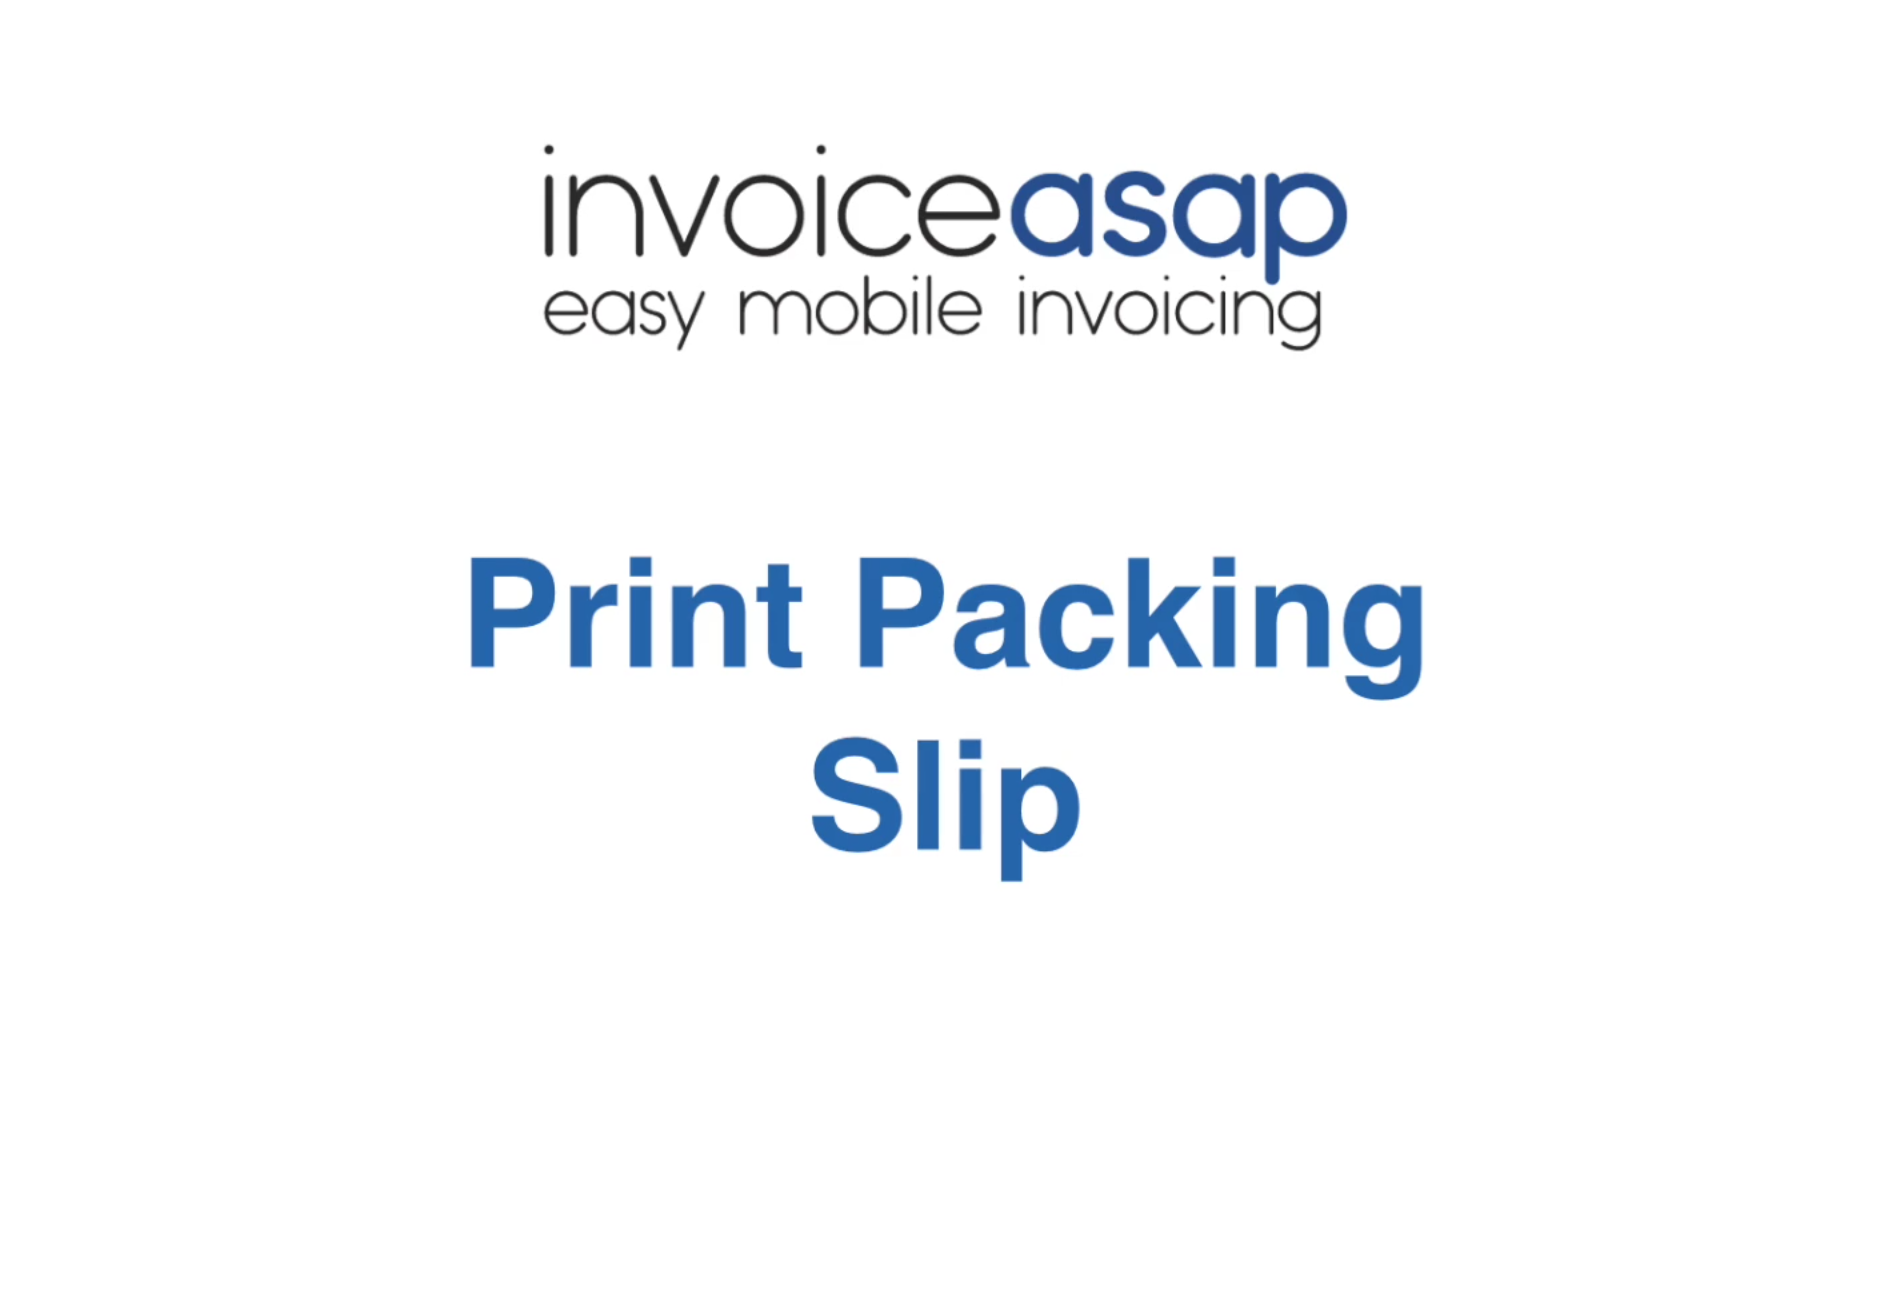 web-dashboard-print-packing-slips-invoiceasap-support